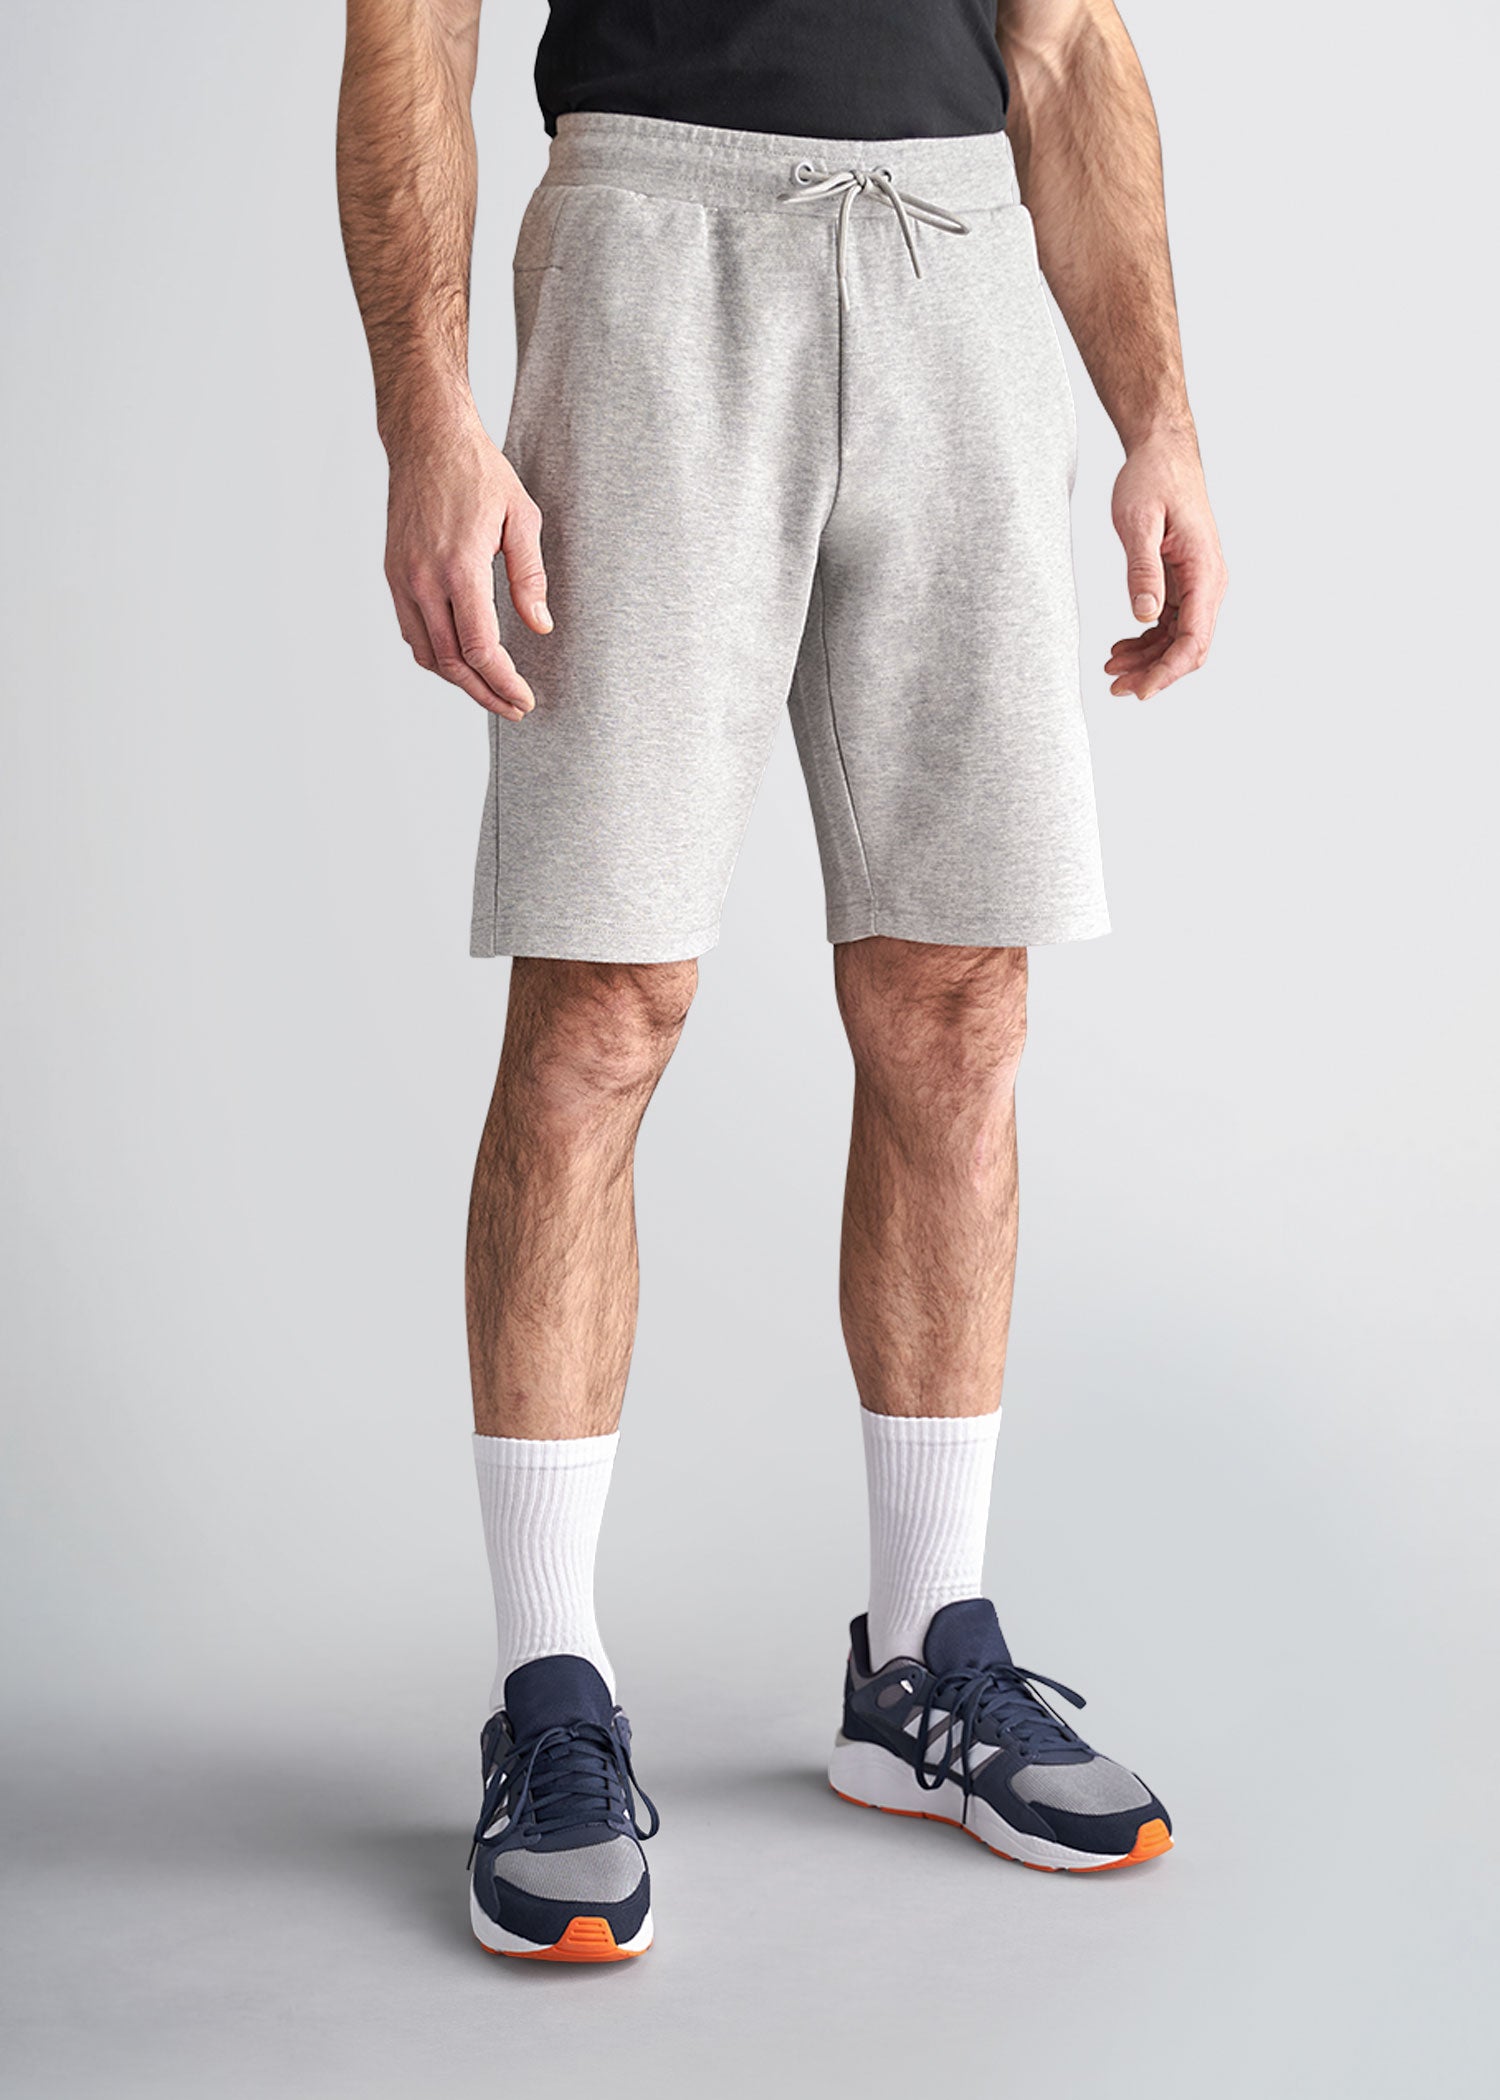 american-tall-mens-knit-athletic-short-grey-front